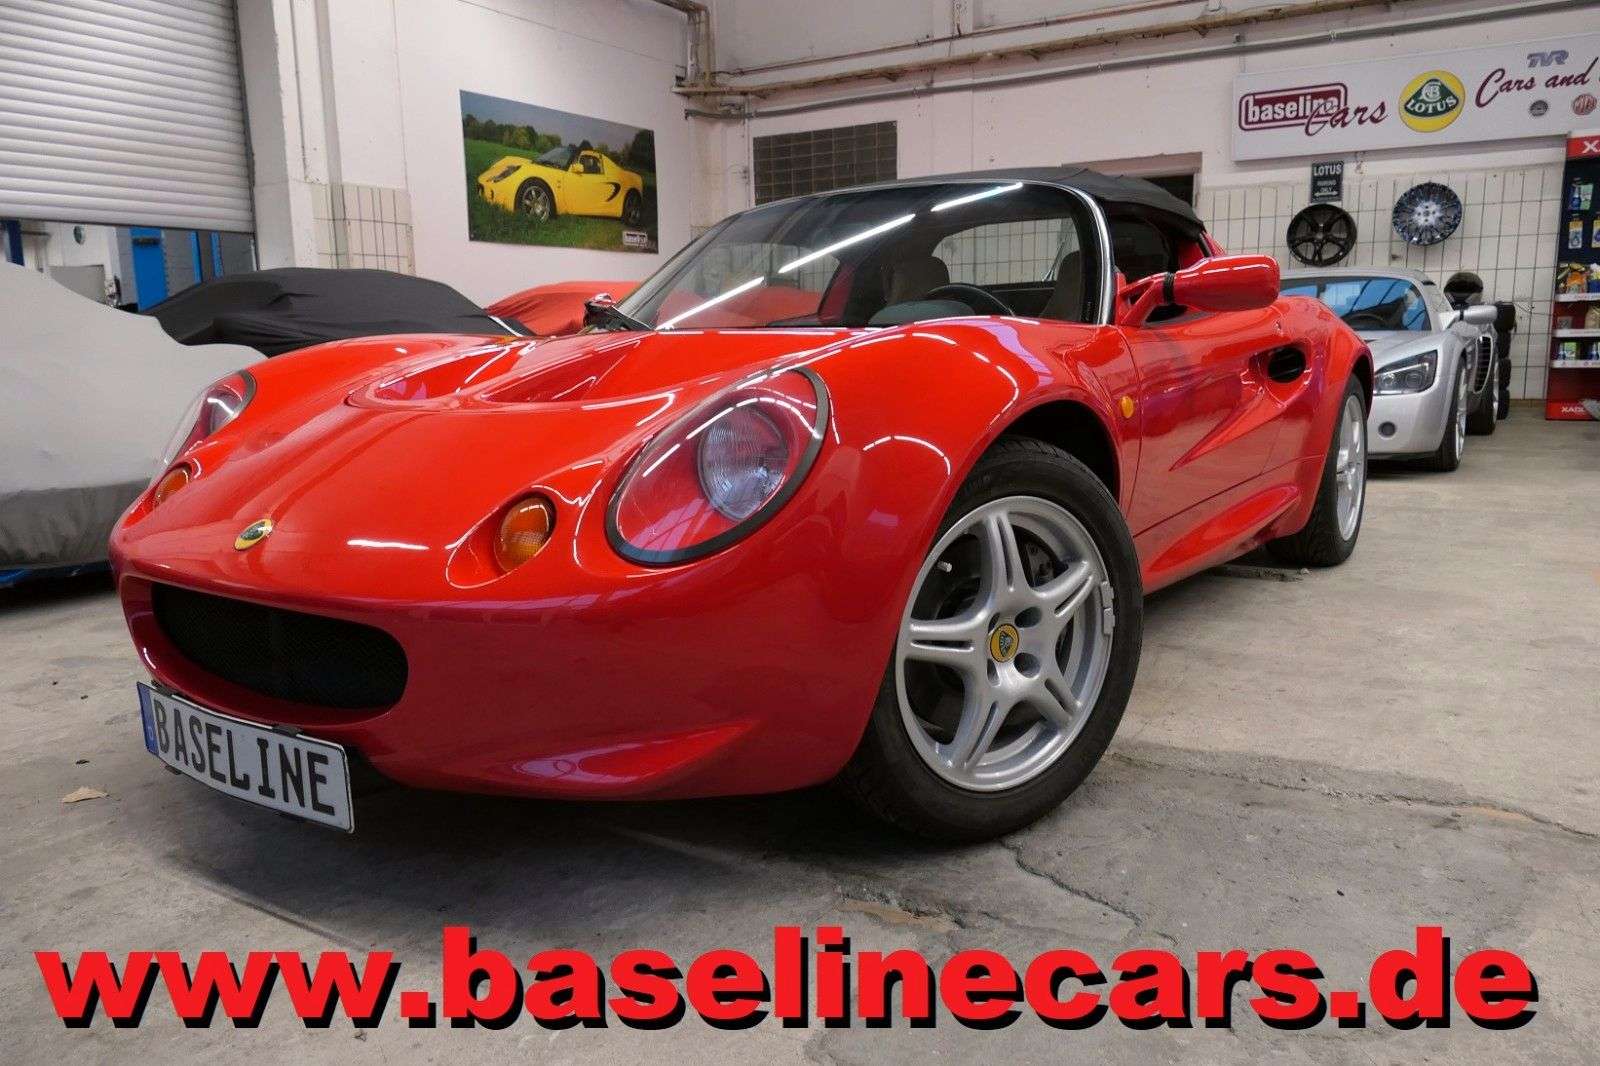 Lotus Elise Convertible in Red used in Berlin for € 32,999.-